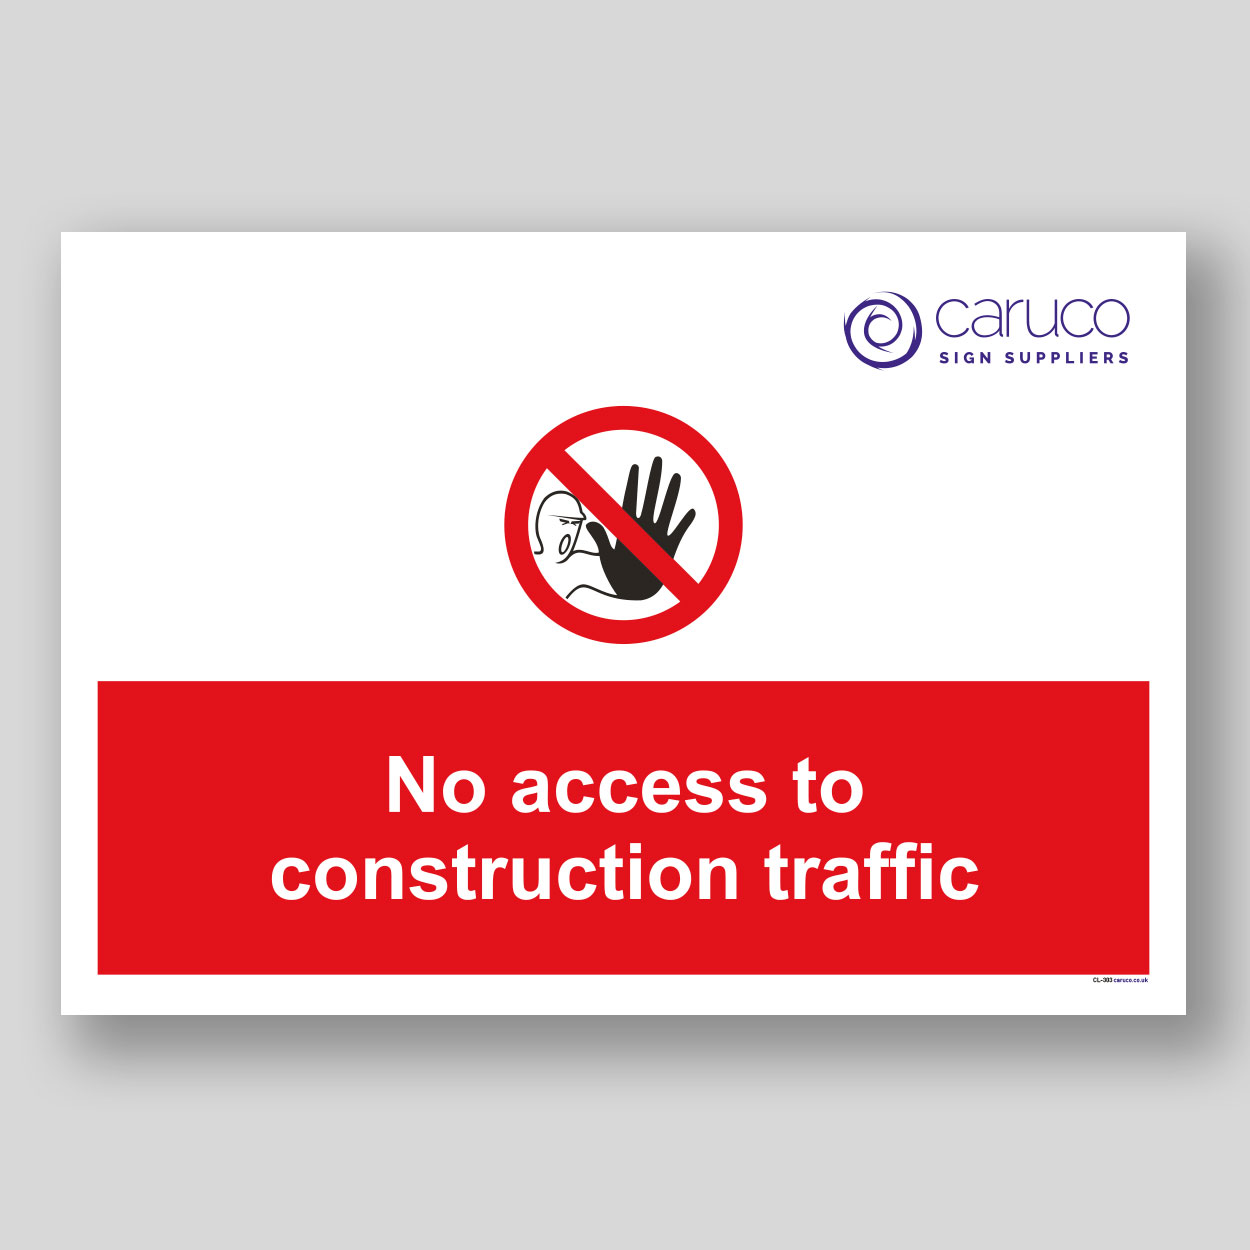 CL-303 No access to construction traffic